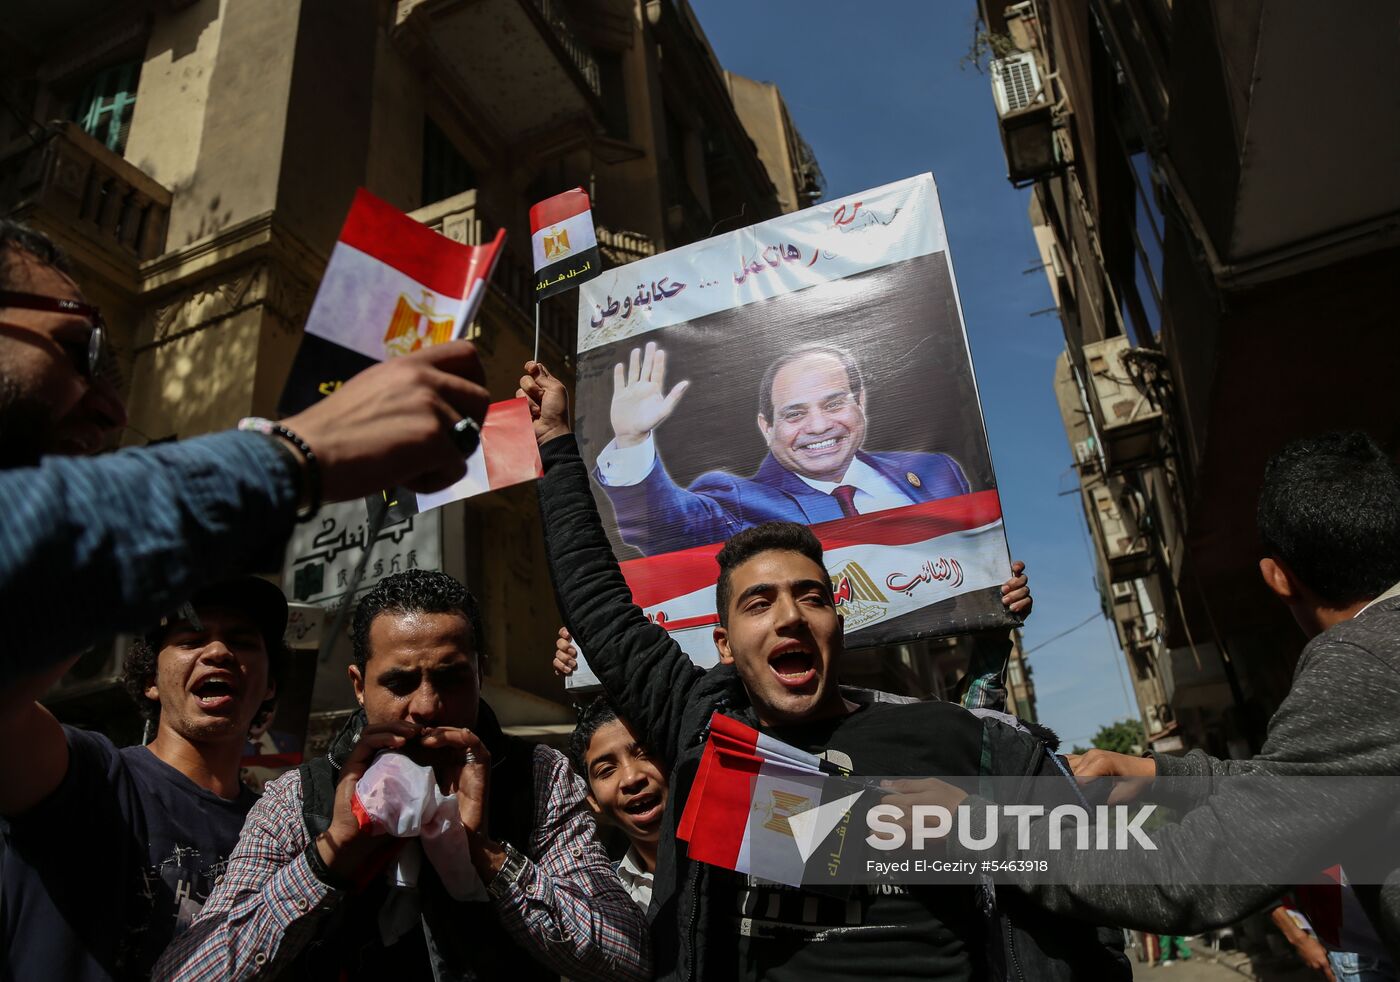 Presidential election in Egypt